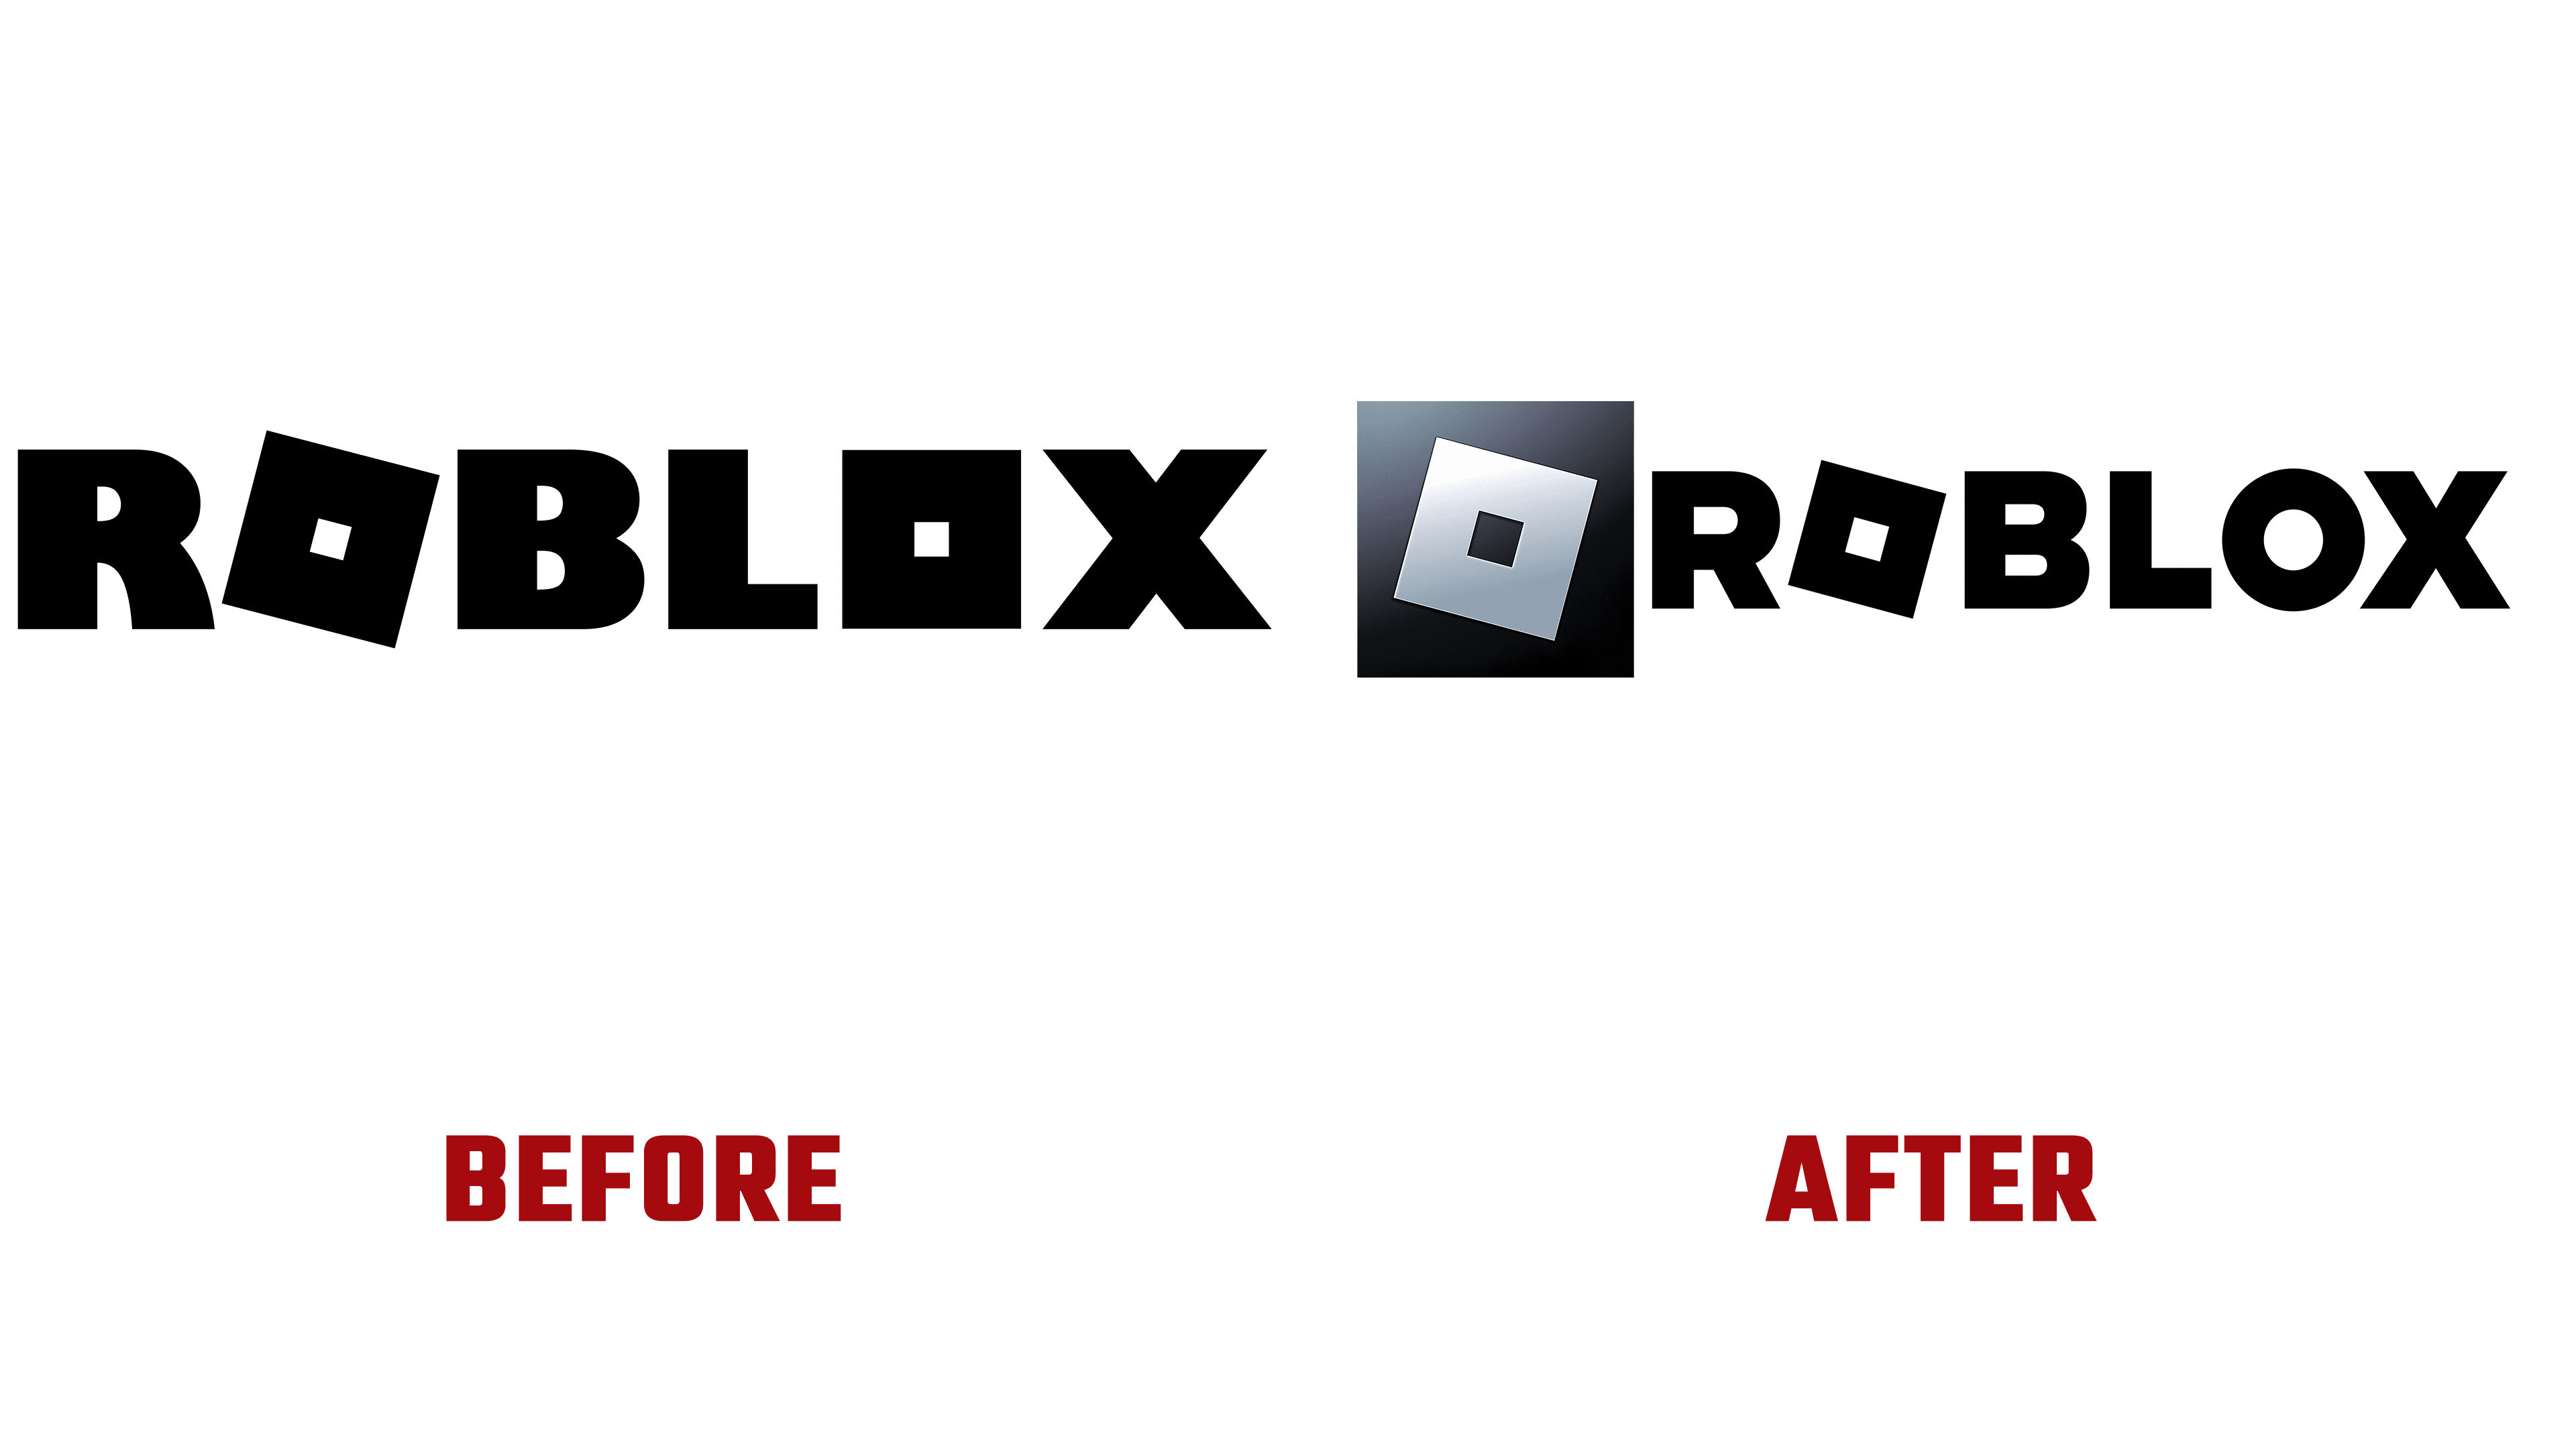 Opinions on the roblox logos over time - Development - Cookie Tech